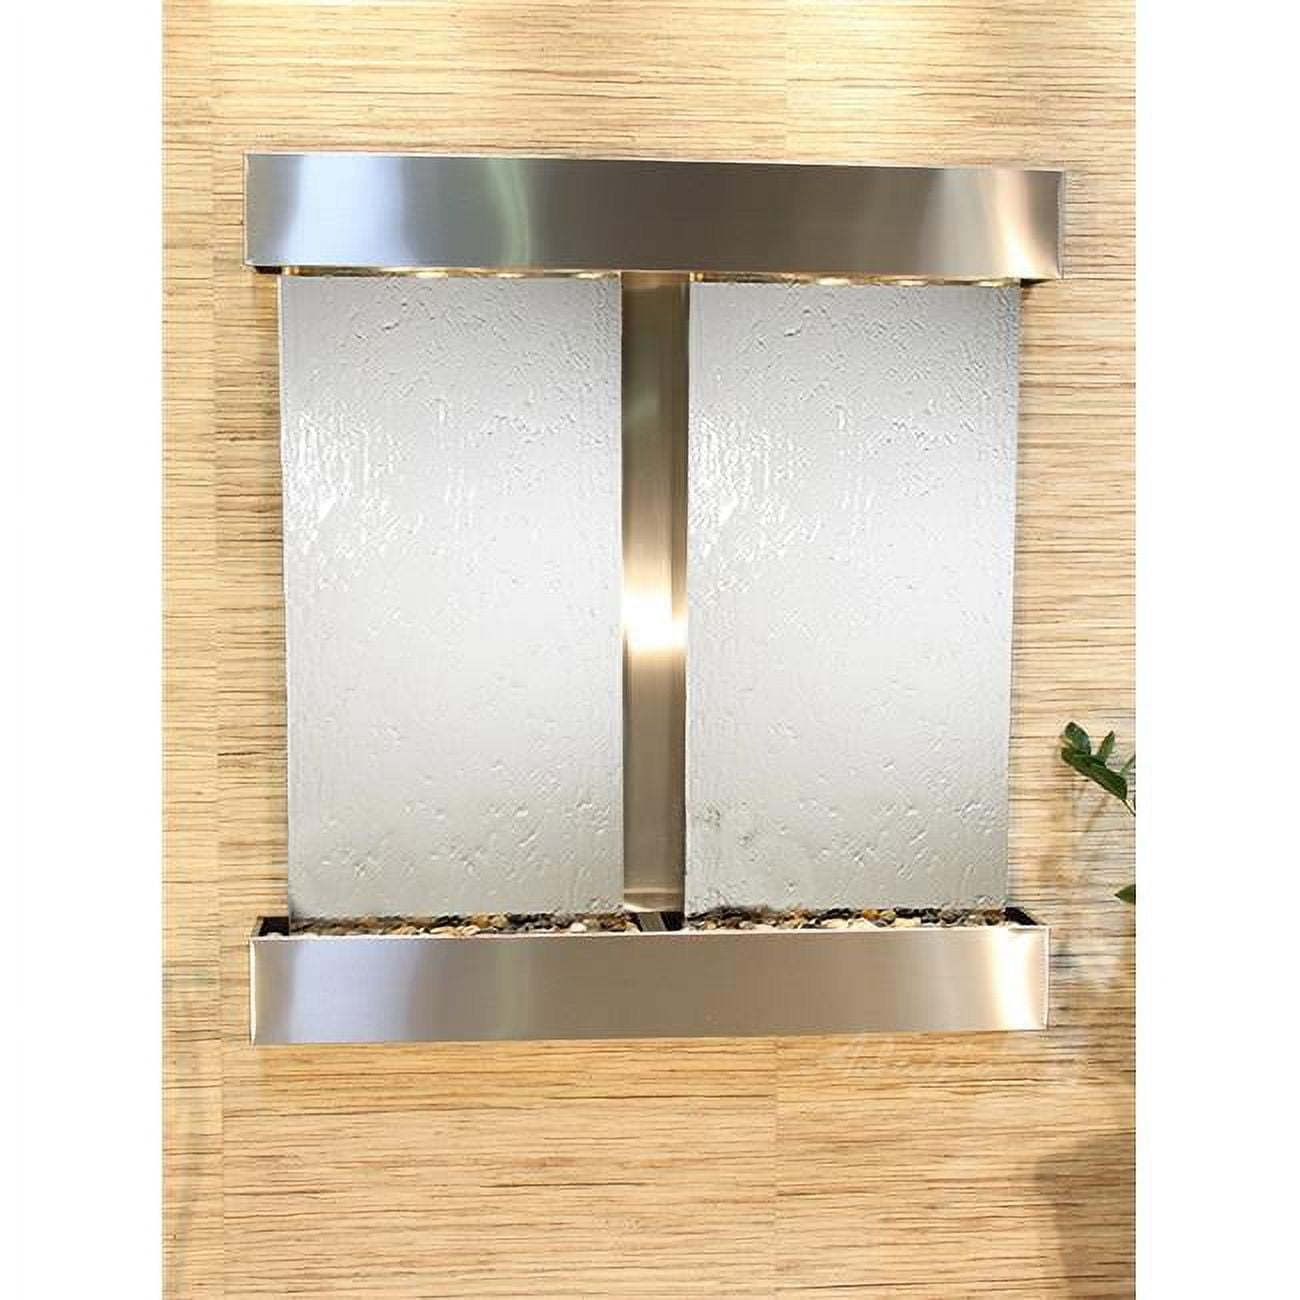 Picture of Adagio AFS2040 Aspen Falls Square Wall Fountain - Stainless Steel-Silver Mirror